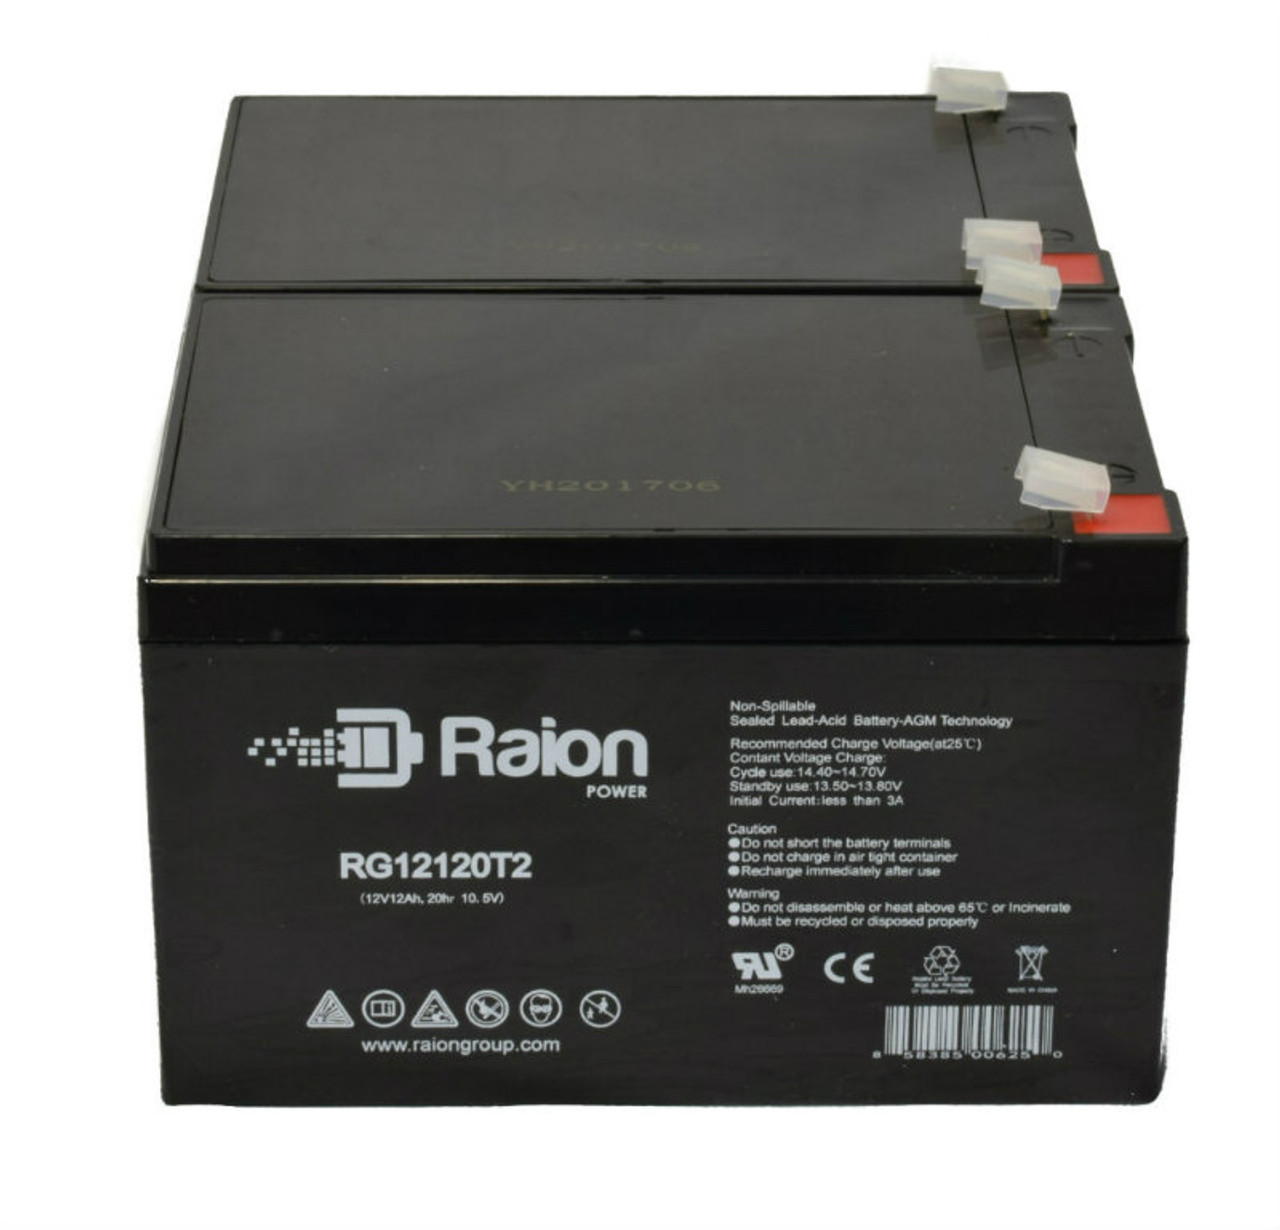 Raion Power RG12120T2 Replacement Fire Alarm Control Panel Battery for Potter Electric PFC-5004E - 2 Pack